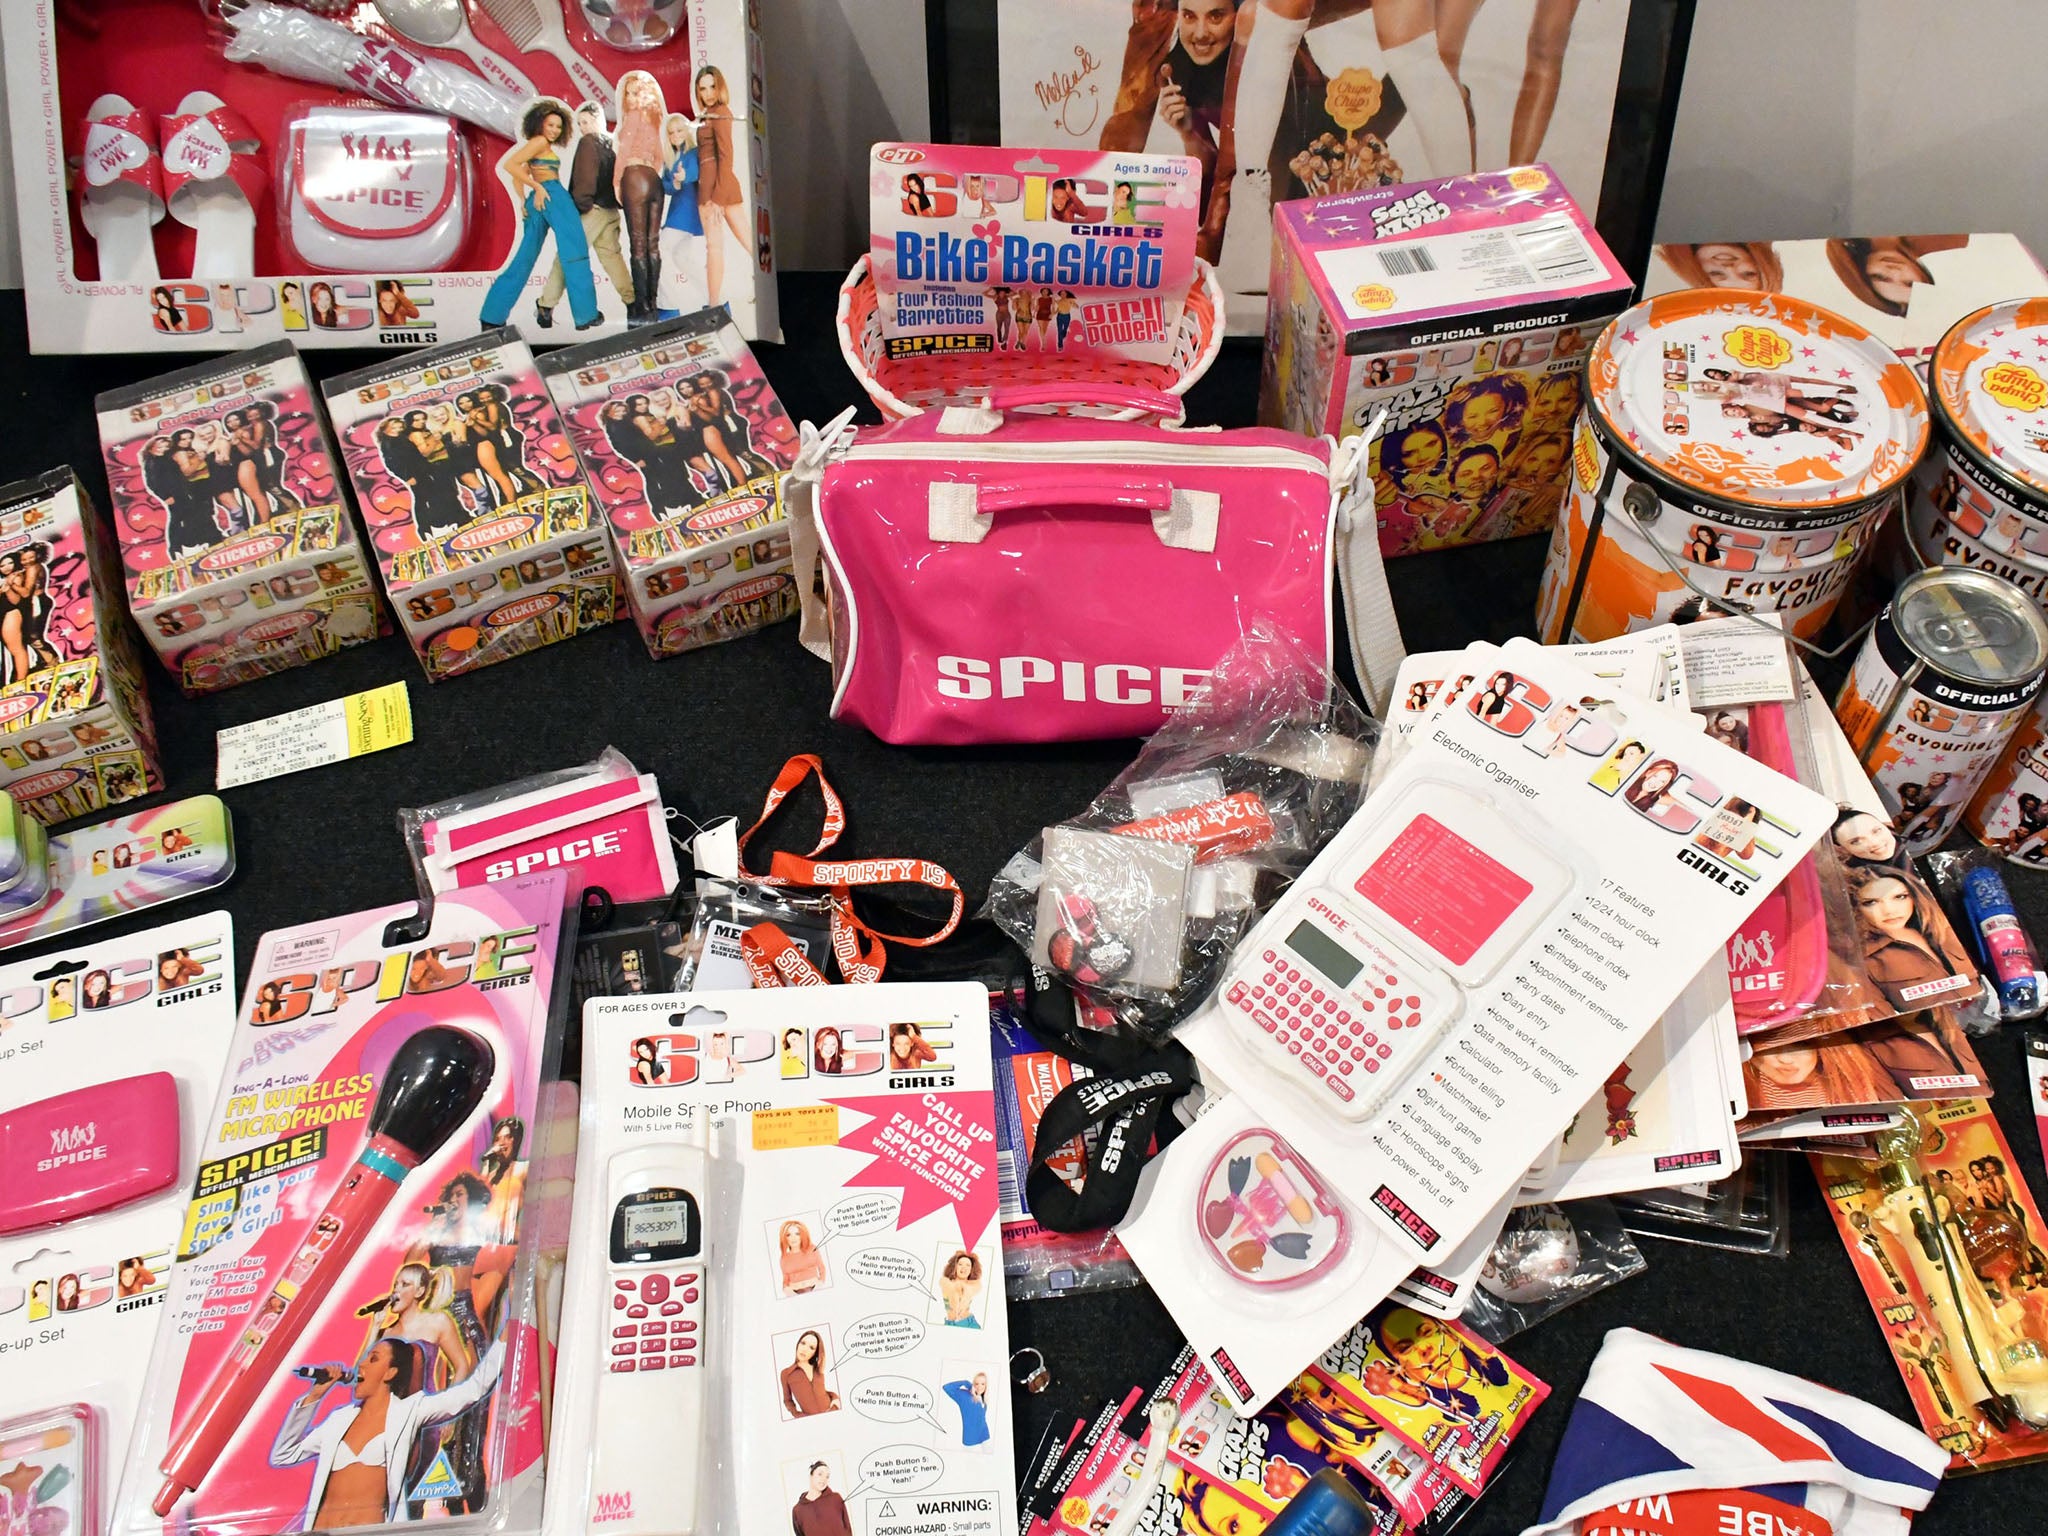 ‘Girl power’ boiled the Spice Girls’ essence so it could fit neatly on pencil cases, notebooks and T-shirts (Rex)